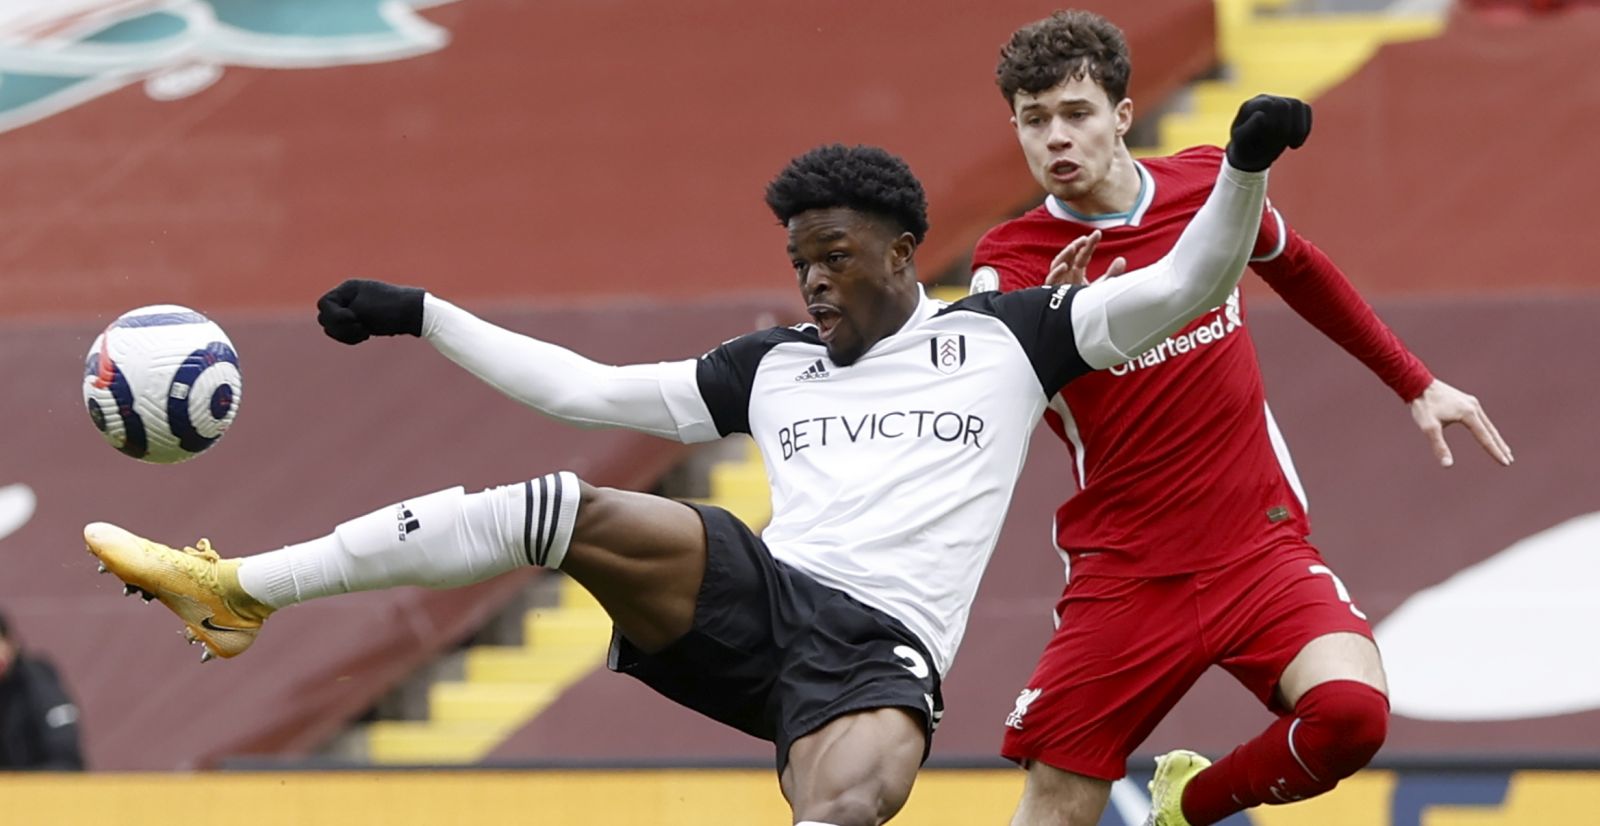 epa09059191 Josh Maja (L) of Fulham in action during the English Premier League soccer match between Liverpool FC and Fulham FC in Liverpool, Britain, 07 March 2021.  EPA/Phil Noble / POOL EDITORIAL USE ONLY. No use with unauthorized audio, video, data, fixture lists, club/league logos or 'live' services. Online in-match use limited to 120 images, no video emulation. No use in betting, games or single club/league/player publications.